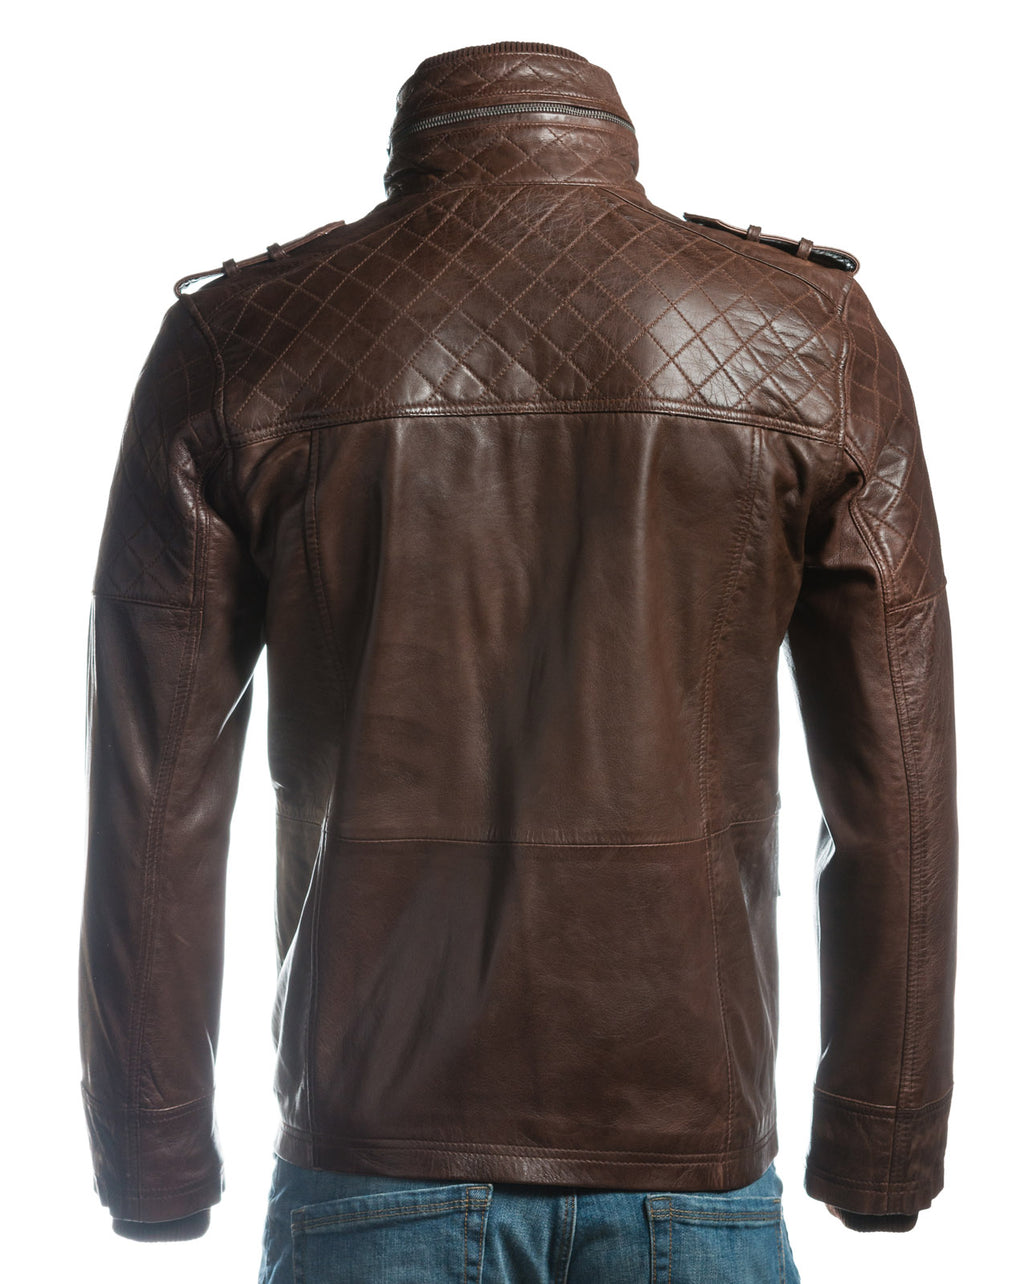 Men's Black Mid Length Leather Jacket With Double Collar Shoulder Stitch Detail: Orlando